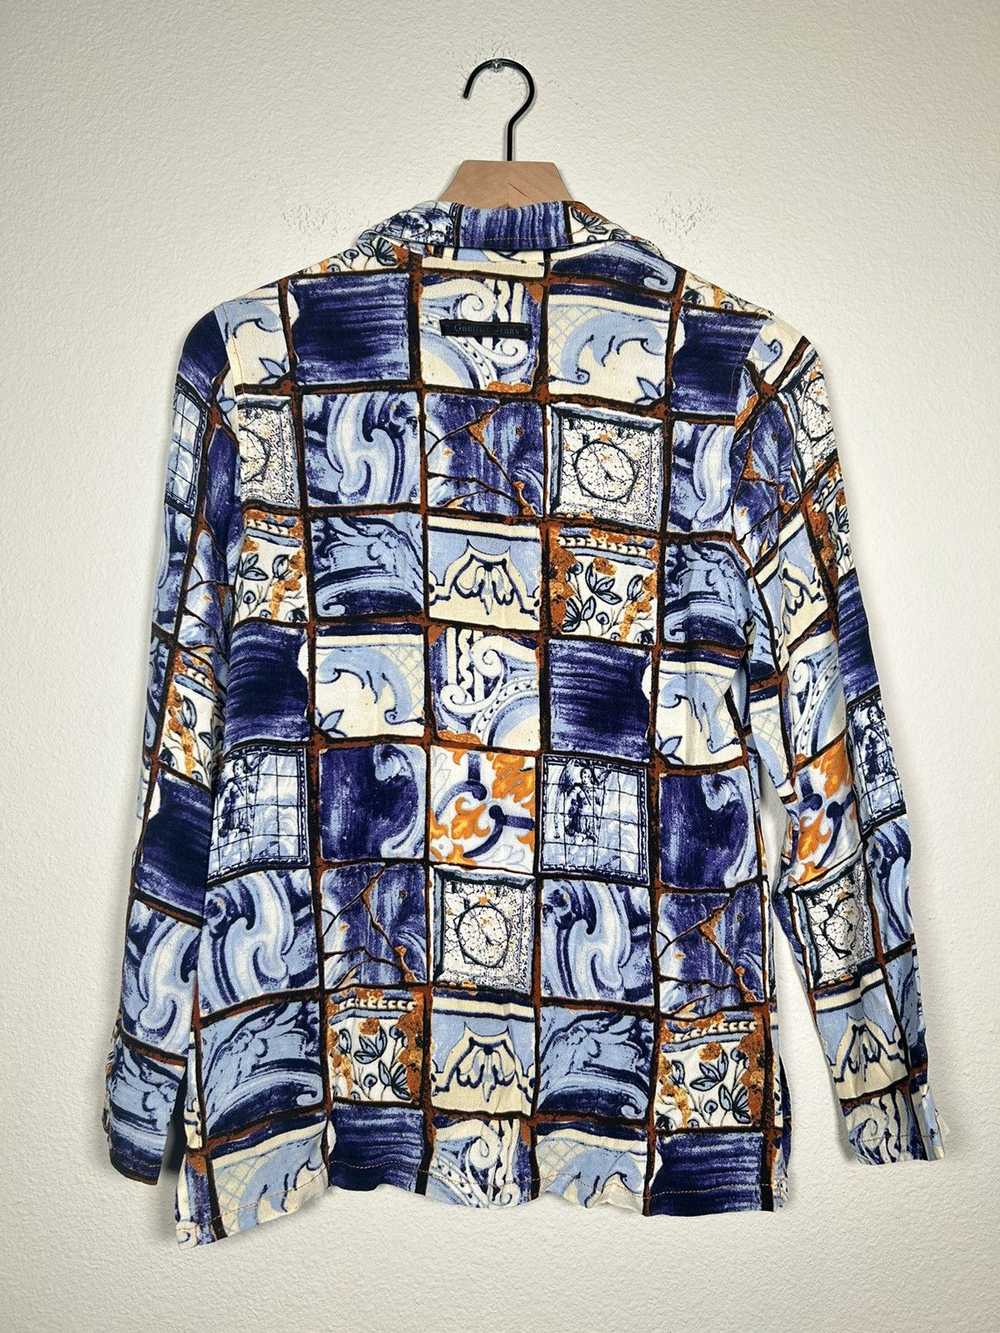 Jean Paul Gaultier 00’s Mosaic Tile Printed Butto… - image 2